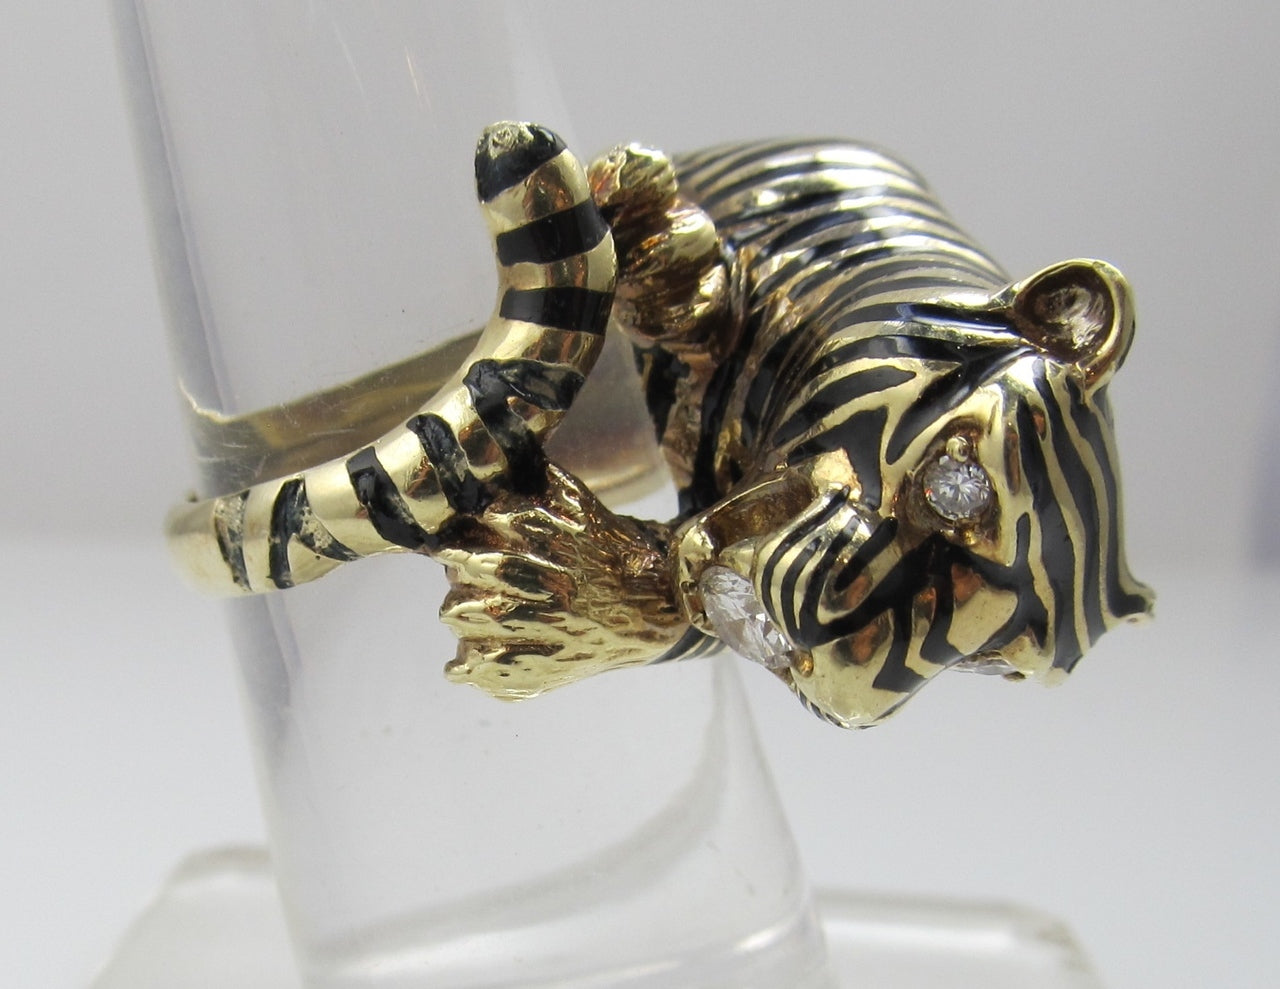 Vintage 14k Gold Enamel Tiger Ring With Diamond Eyes And A .20ct Diamond In It's Mouth